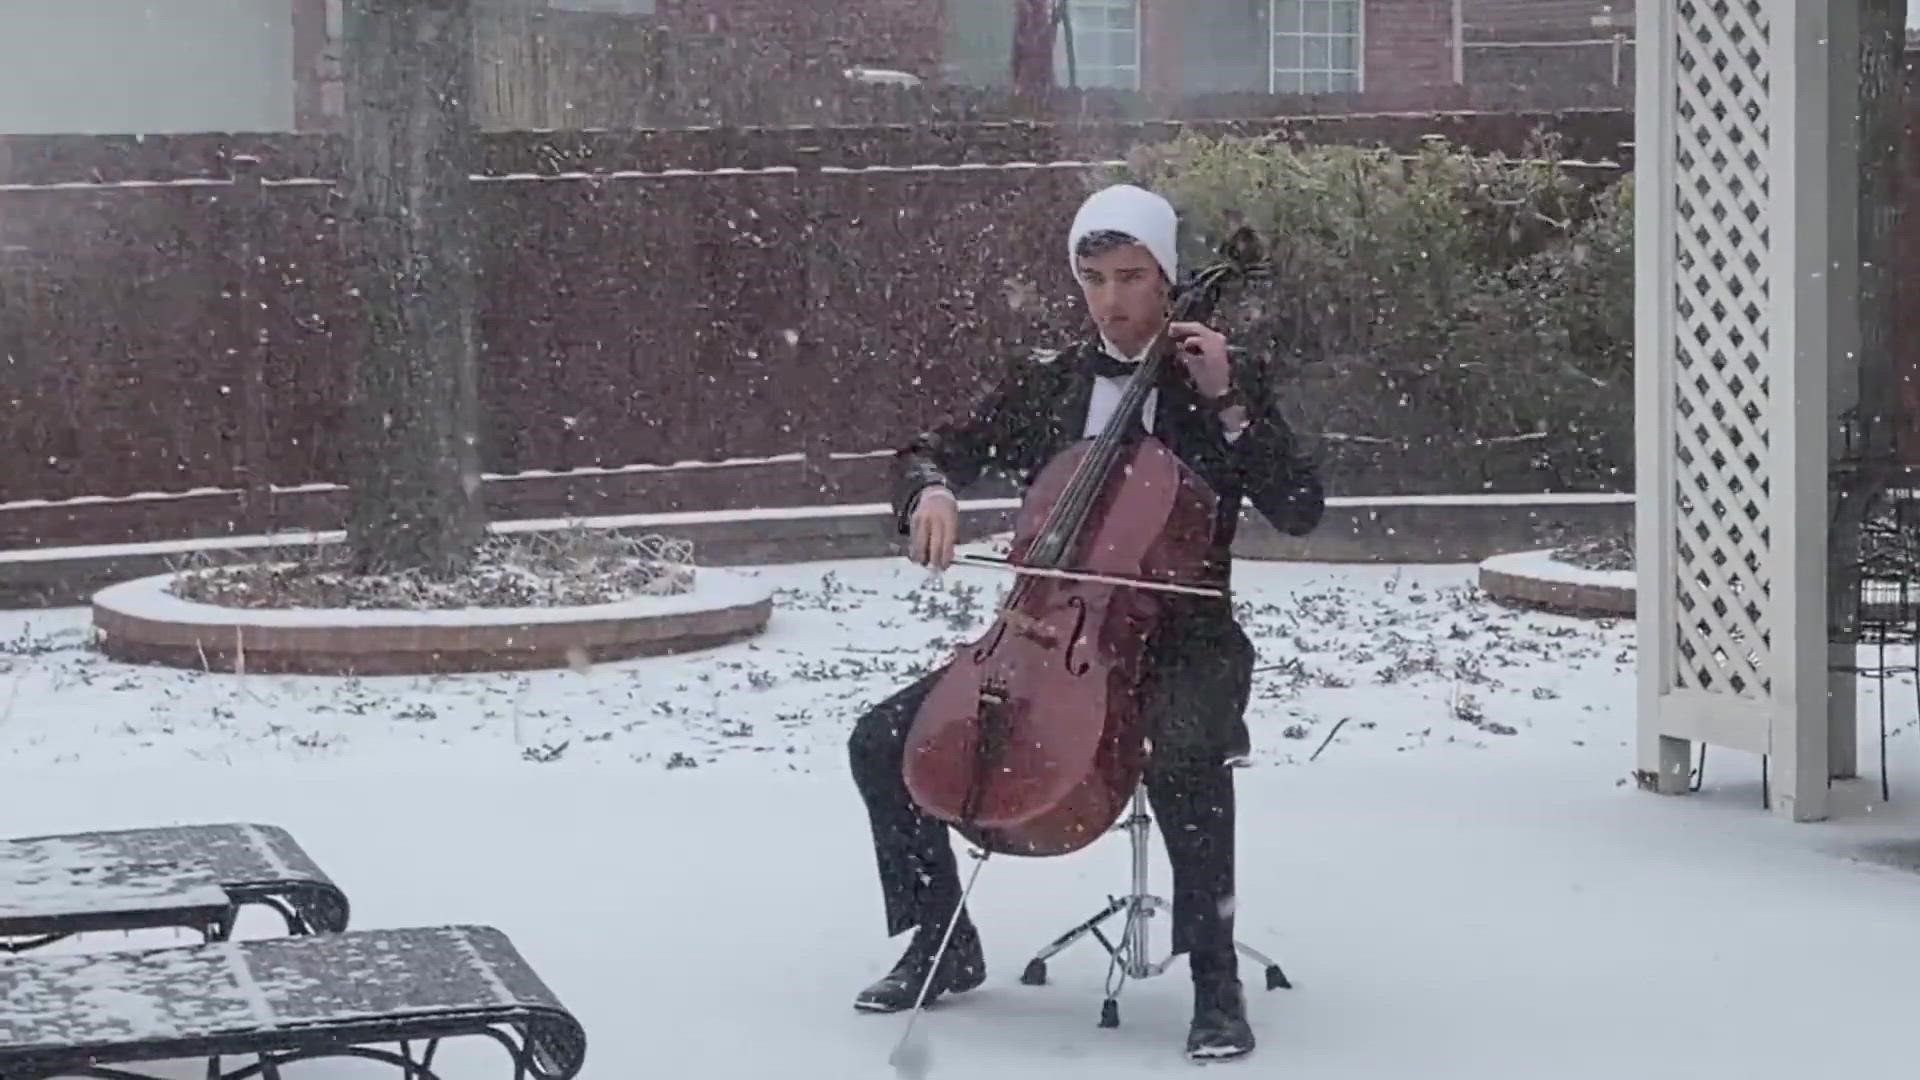 Andrew Taylor(15) put on his nicest Tux and beanie & performed a cello concert in the middle of the snow storm
Credit: Andrew’s older sister, Rachel